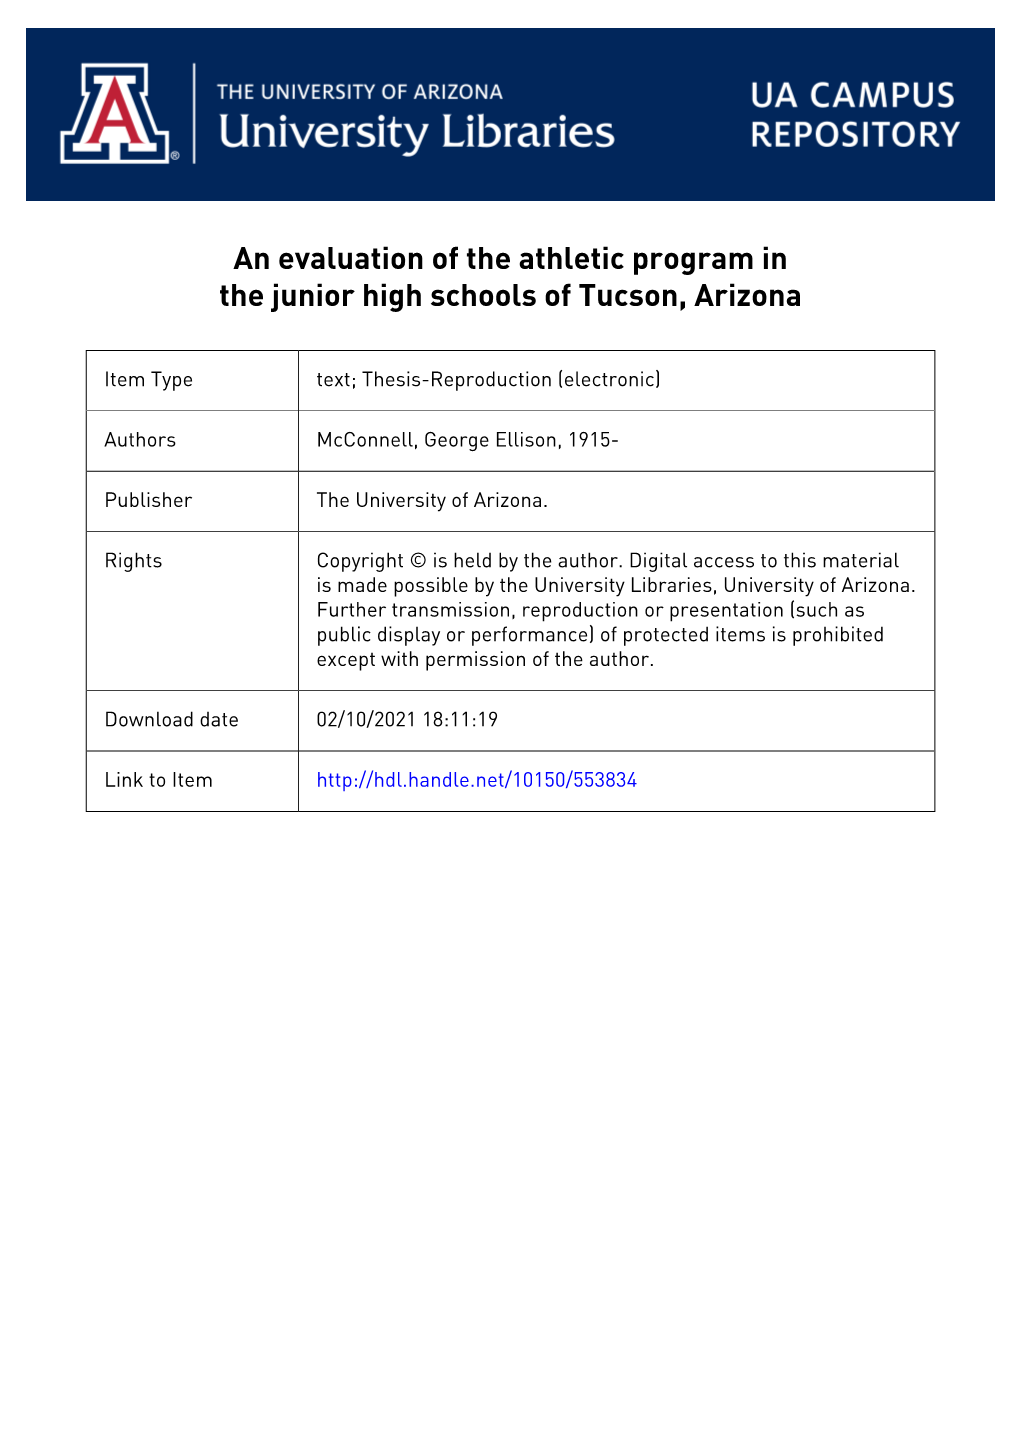 An Evaluation of the Athletic Program in the Junior High Schools of Tucson, Arizona